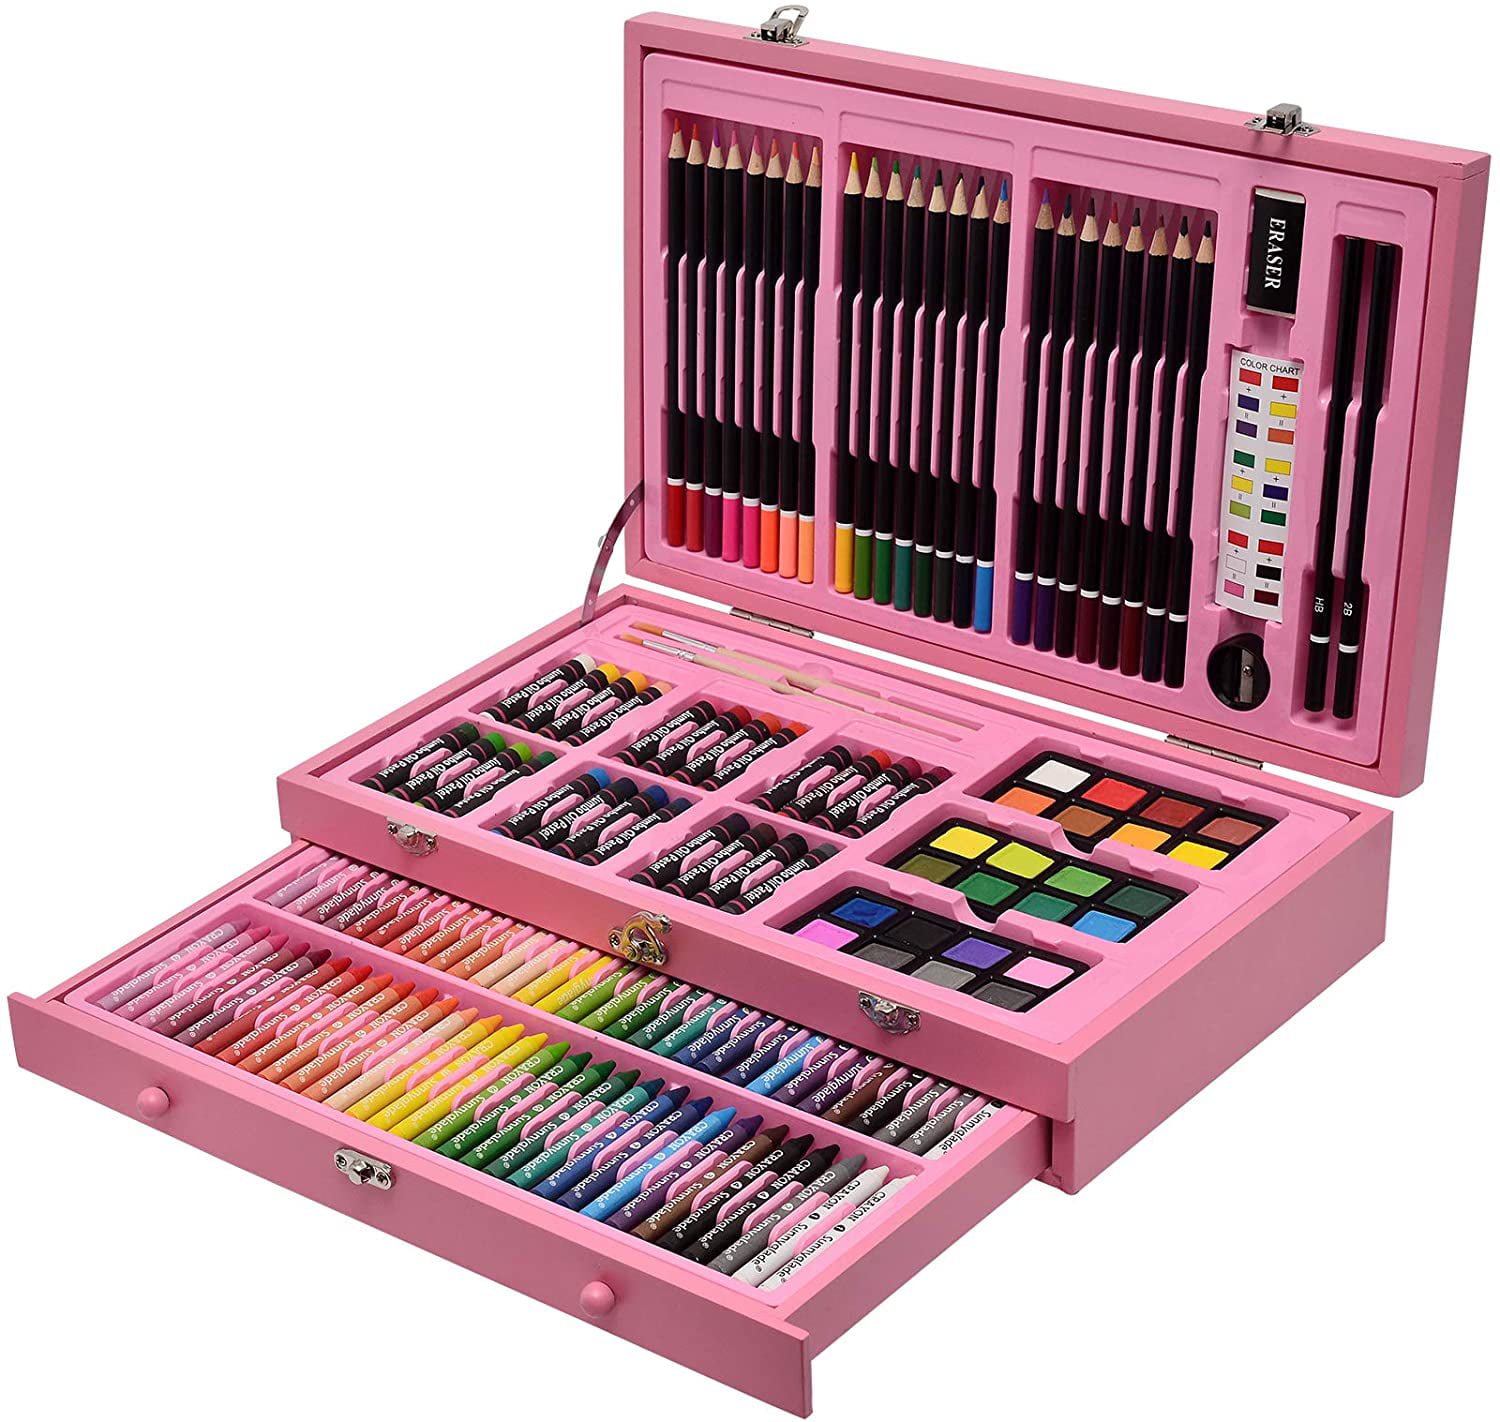 Wooden Wooden Case Art Supplies for Teen and Adult GRANDAN 145 Pieces Deluxe Art Set in Portable Wooden Box Drawing Kit Set with Oil Pastels Brushes Watercolor Cakes Crayons Colored Pencils 